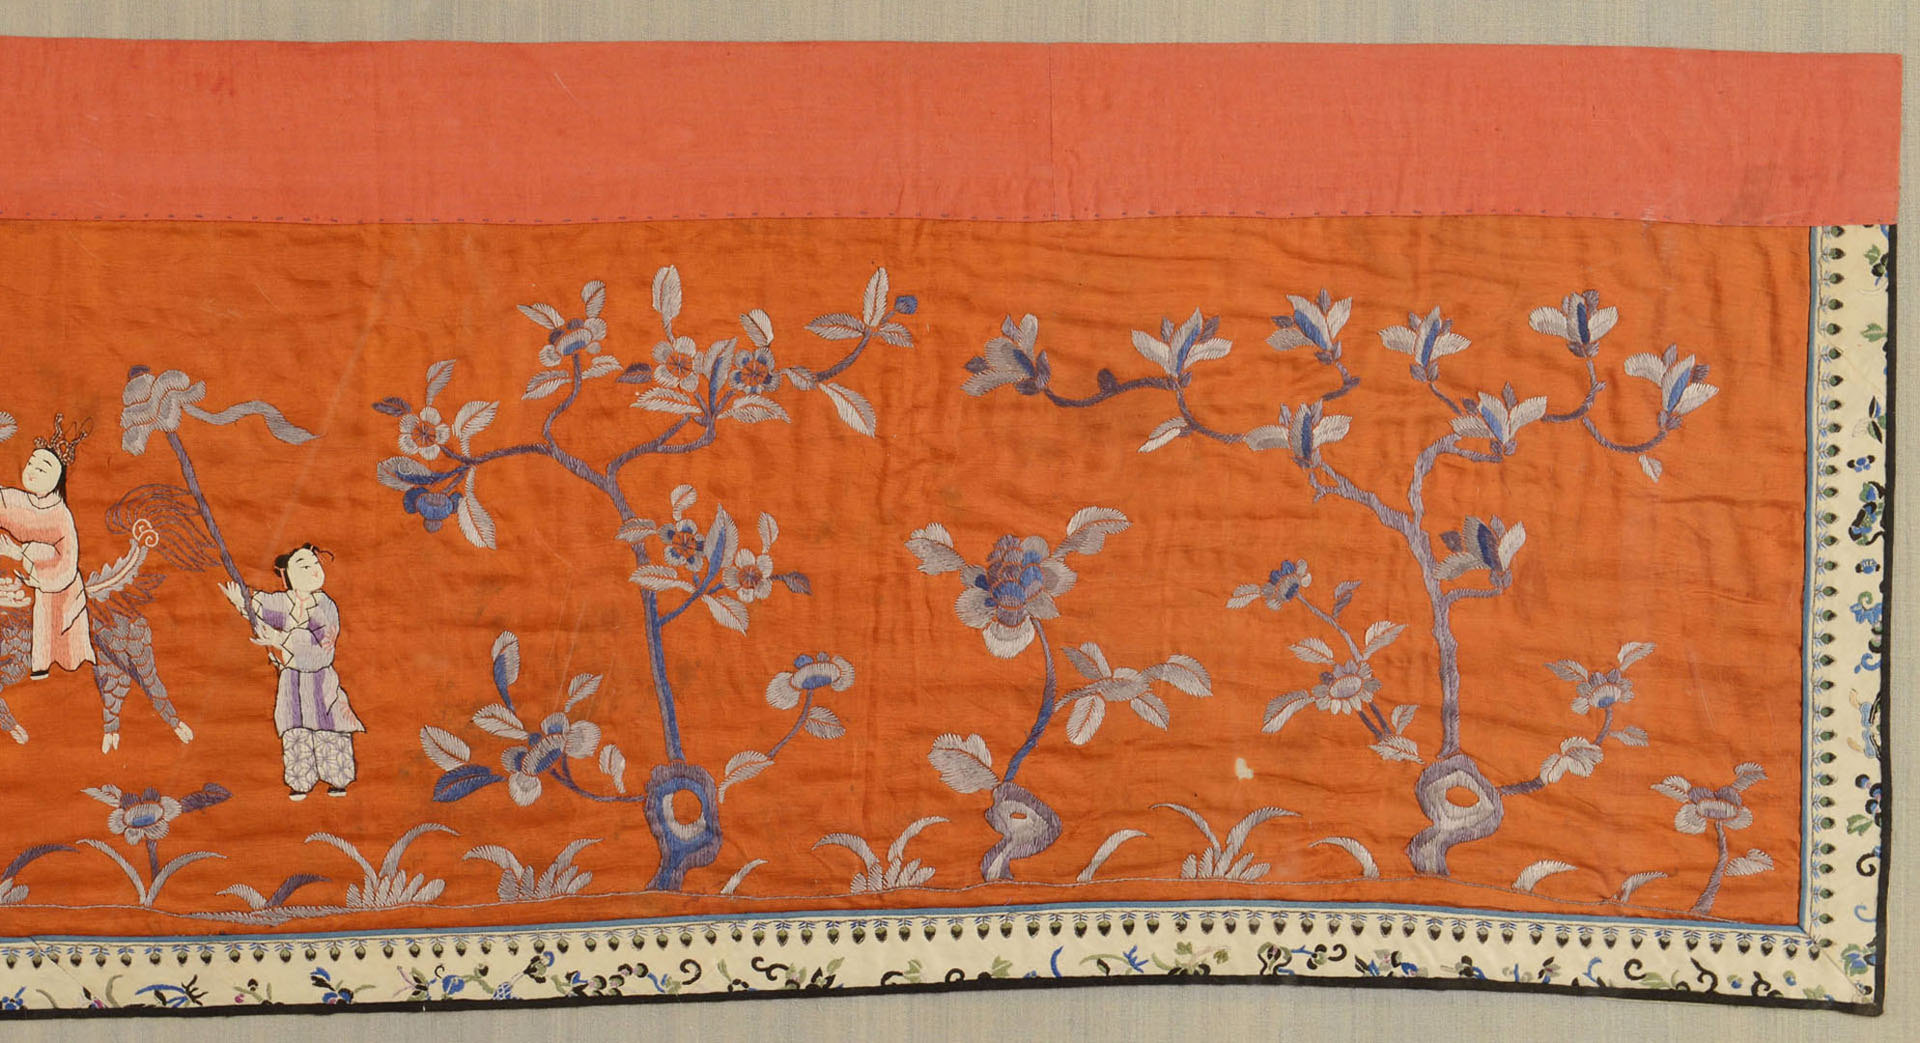 Lot 6: Framed Chinese Silk Embroidery on Red Ground